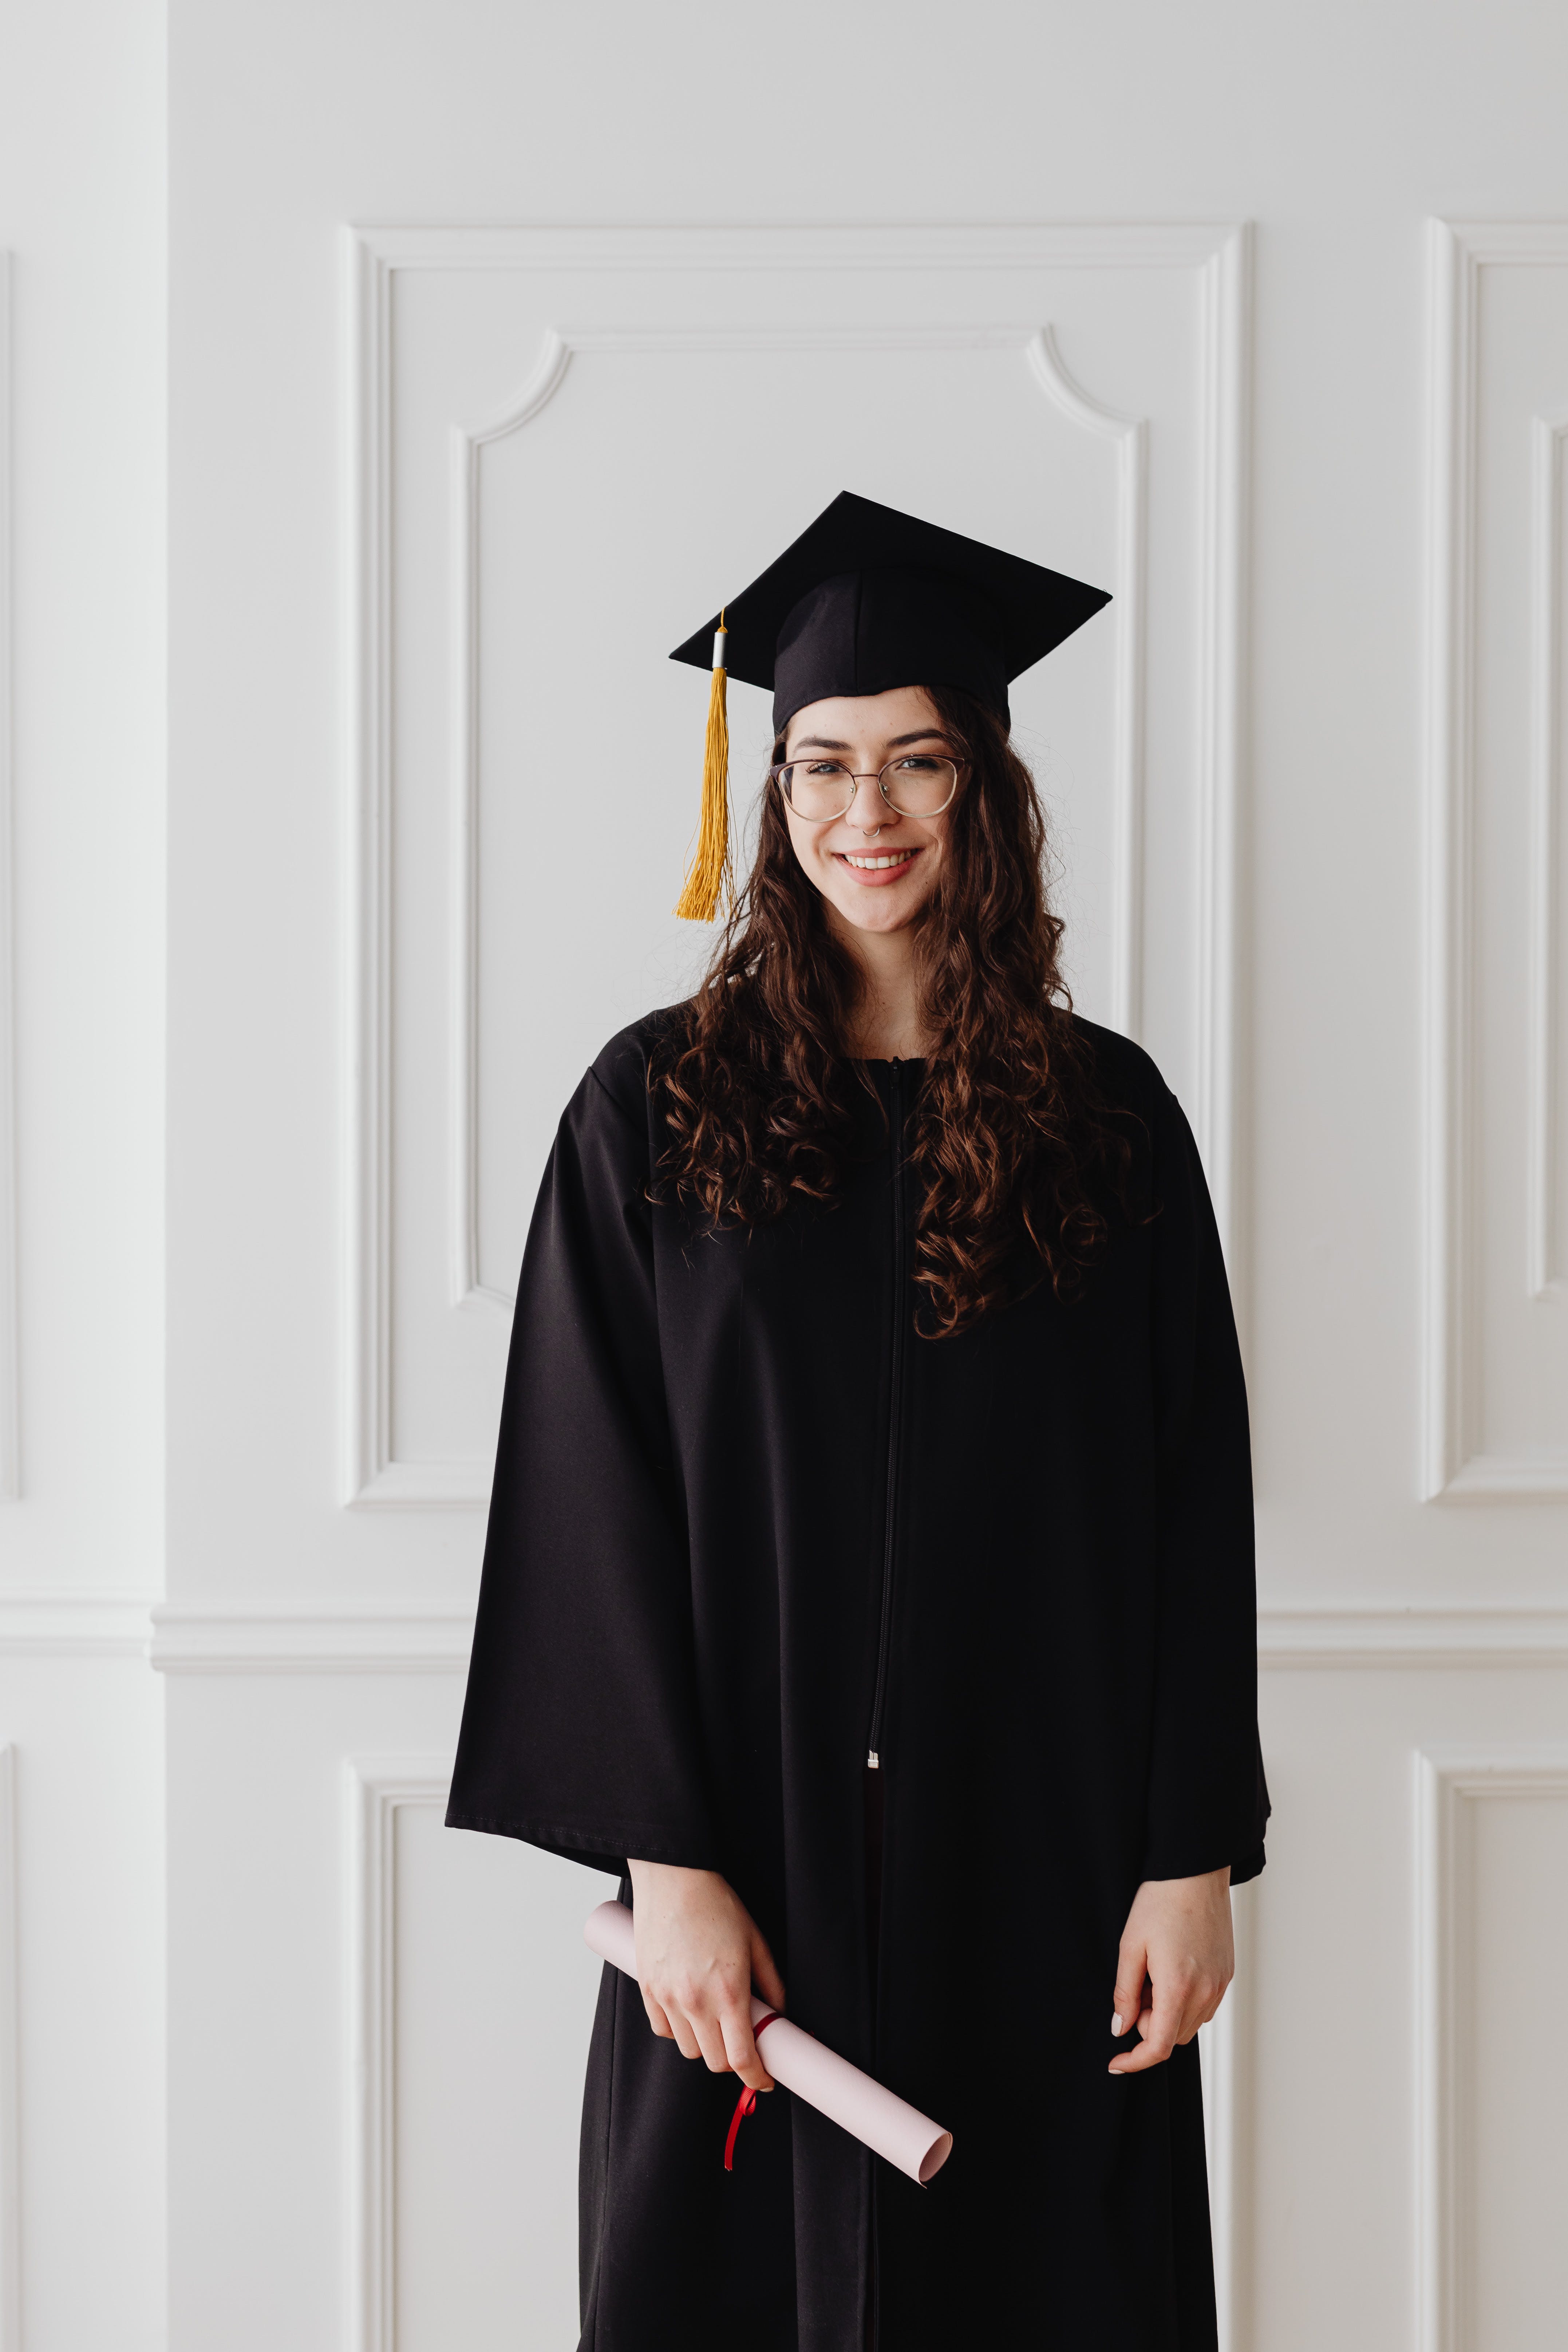 A woman smiles as she poses in graduation attire | Source: Pexels